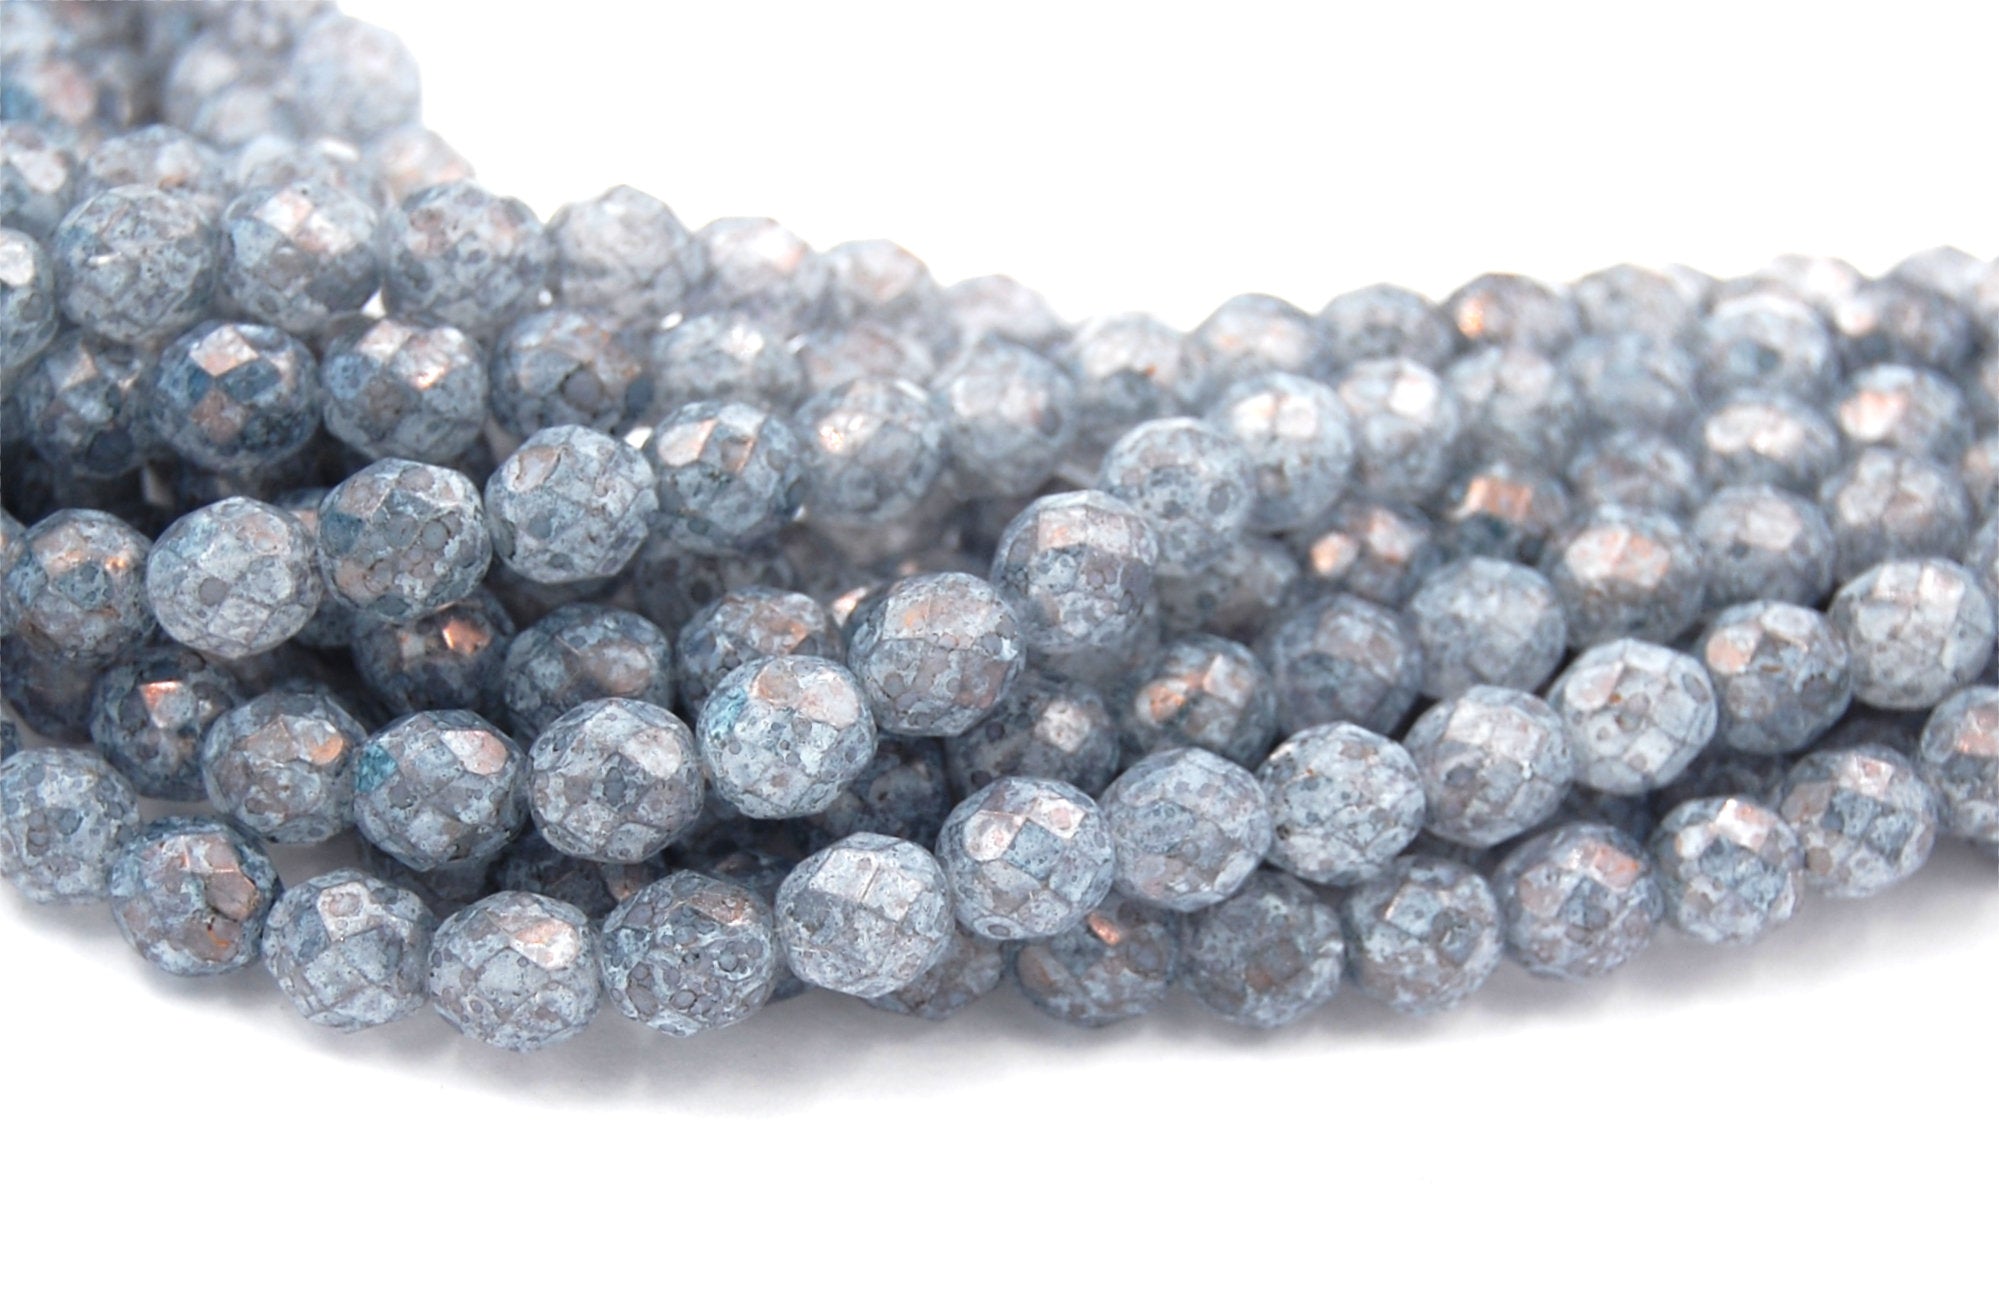 Stone Grey Luster Faceted Czech Glass Bead 8mm Round - 25 Pc